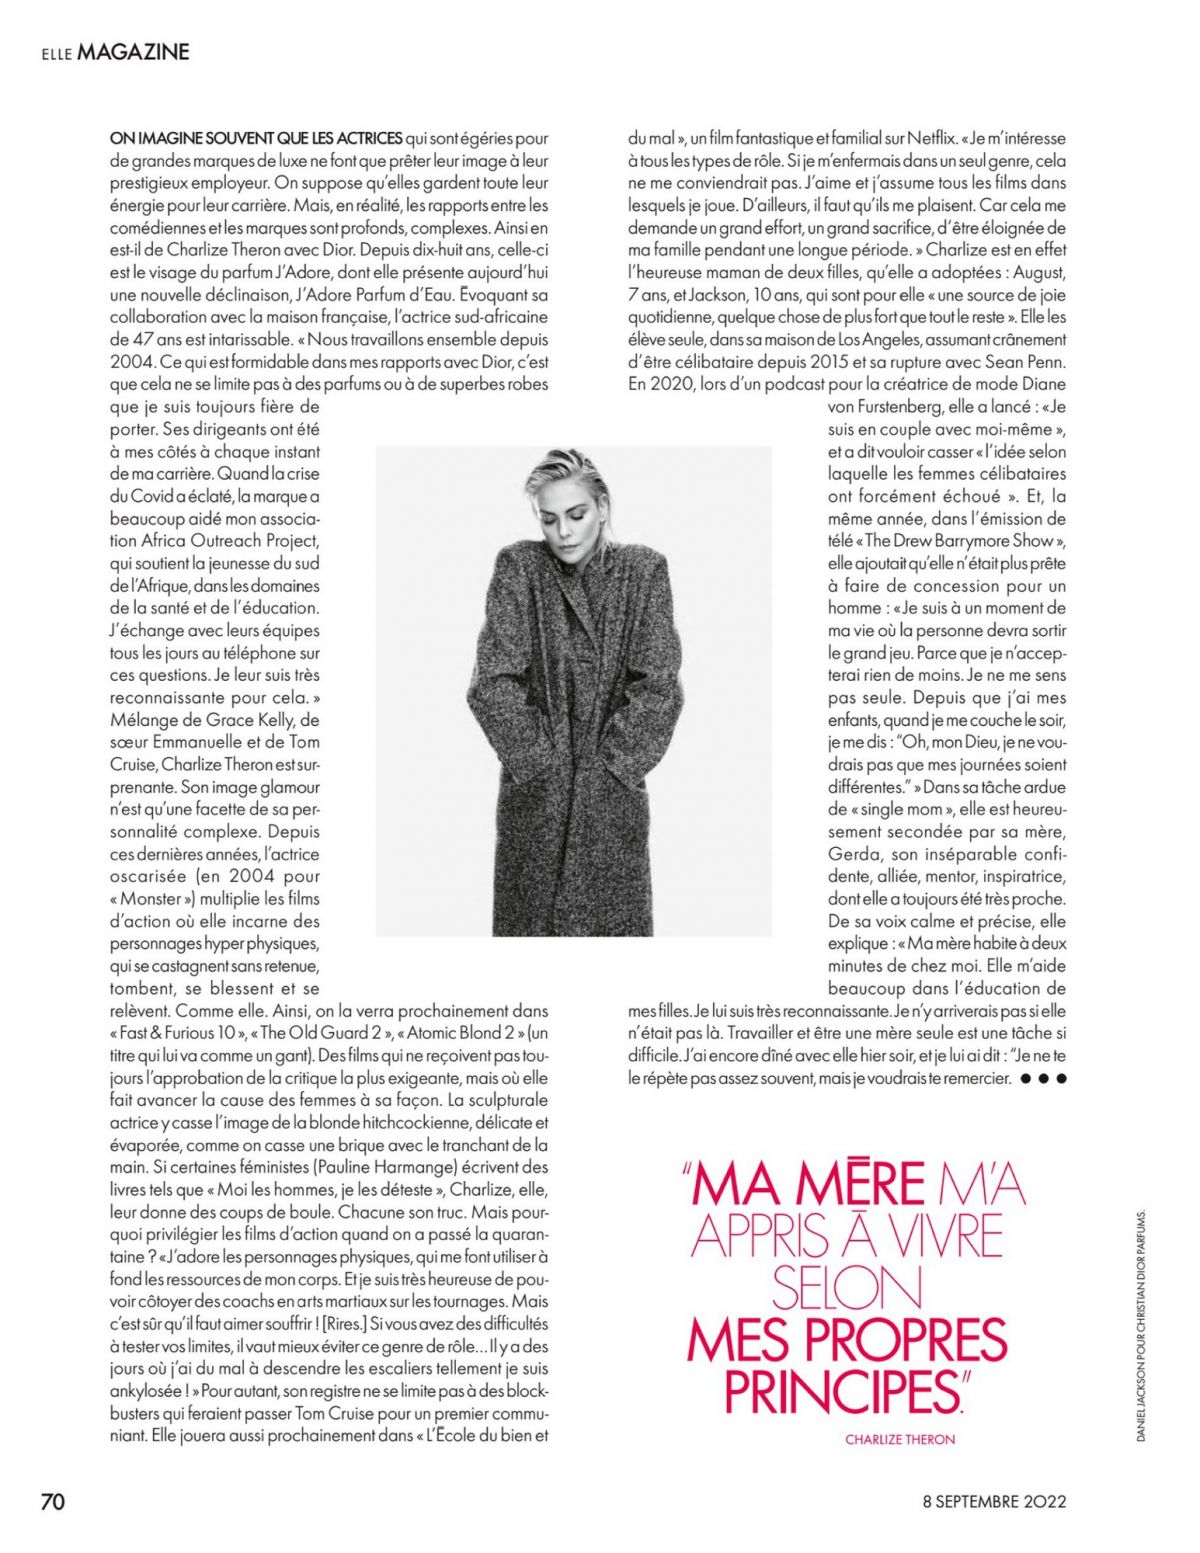 Charlize Theron in Elle Magazine France, September 2022 Issue